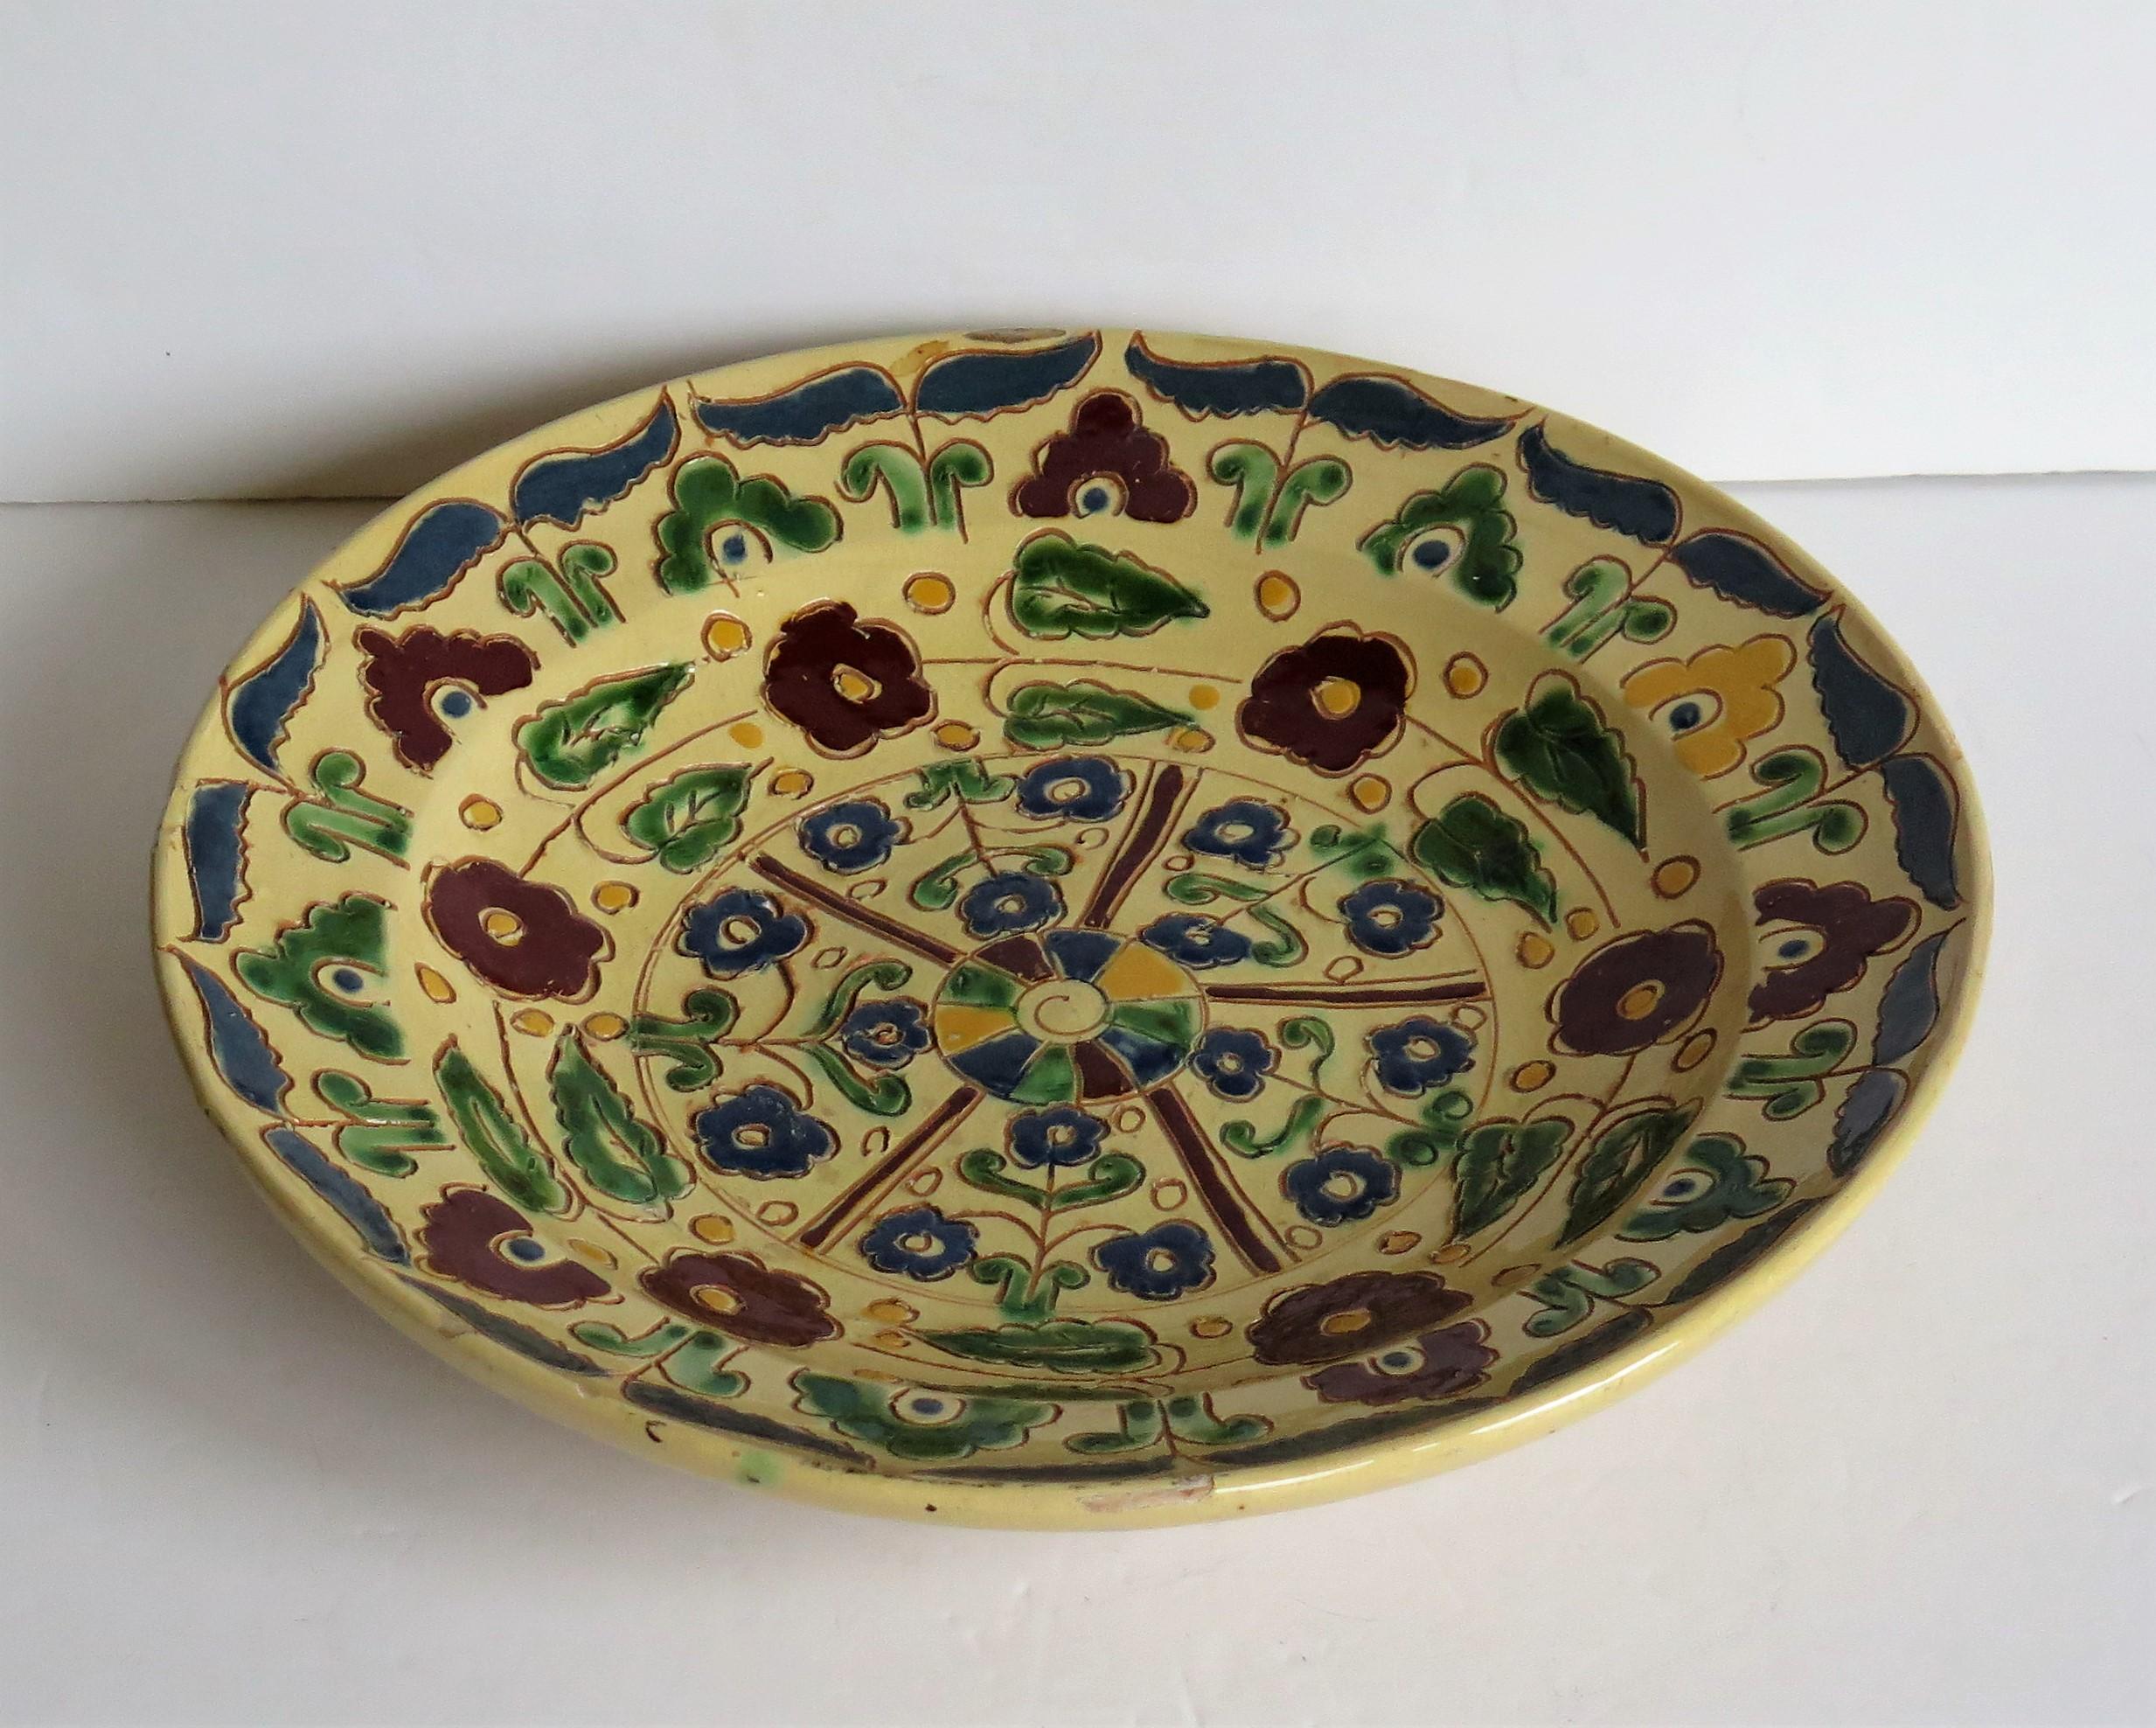 Rare Sgraffito Redware Slip Decorated Pottery Charger Large Plate, 19th Century In Good Condition For Sale In Lincoln, Lincolnshire